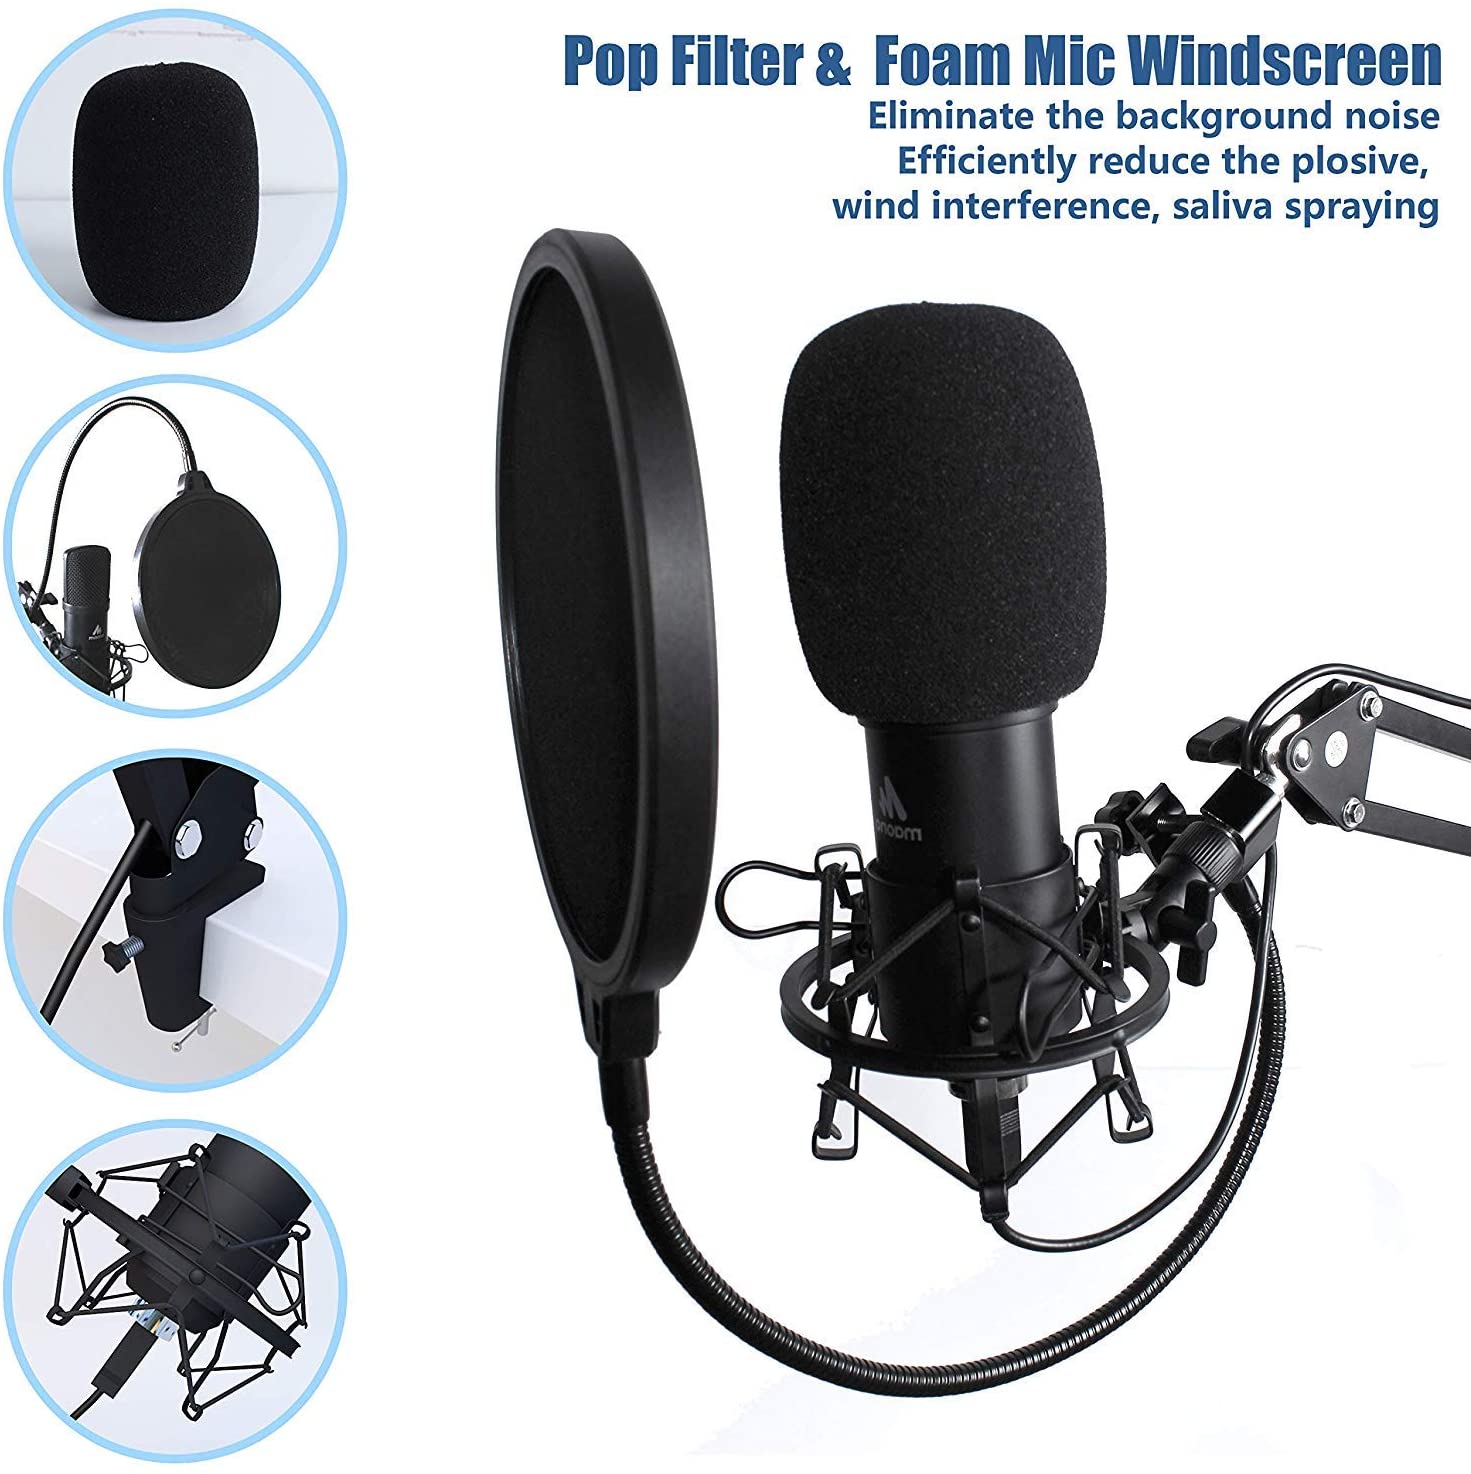 FIFINE Studio Condenser USB Microphone Computer PC Microphone Kit with –  lumtronic